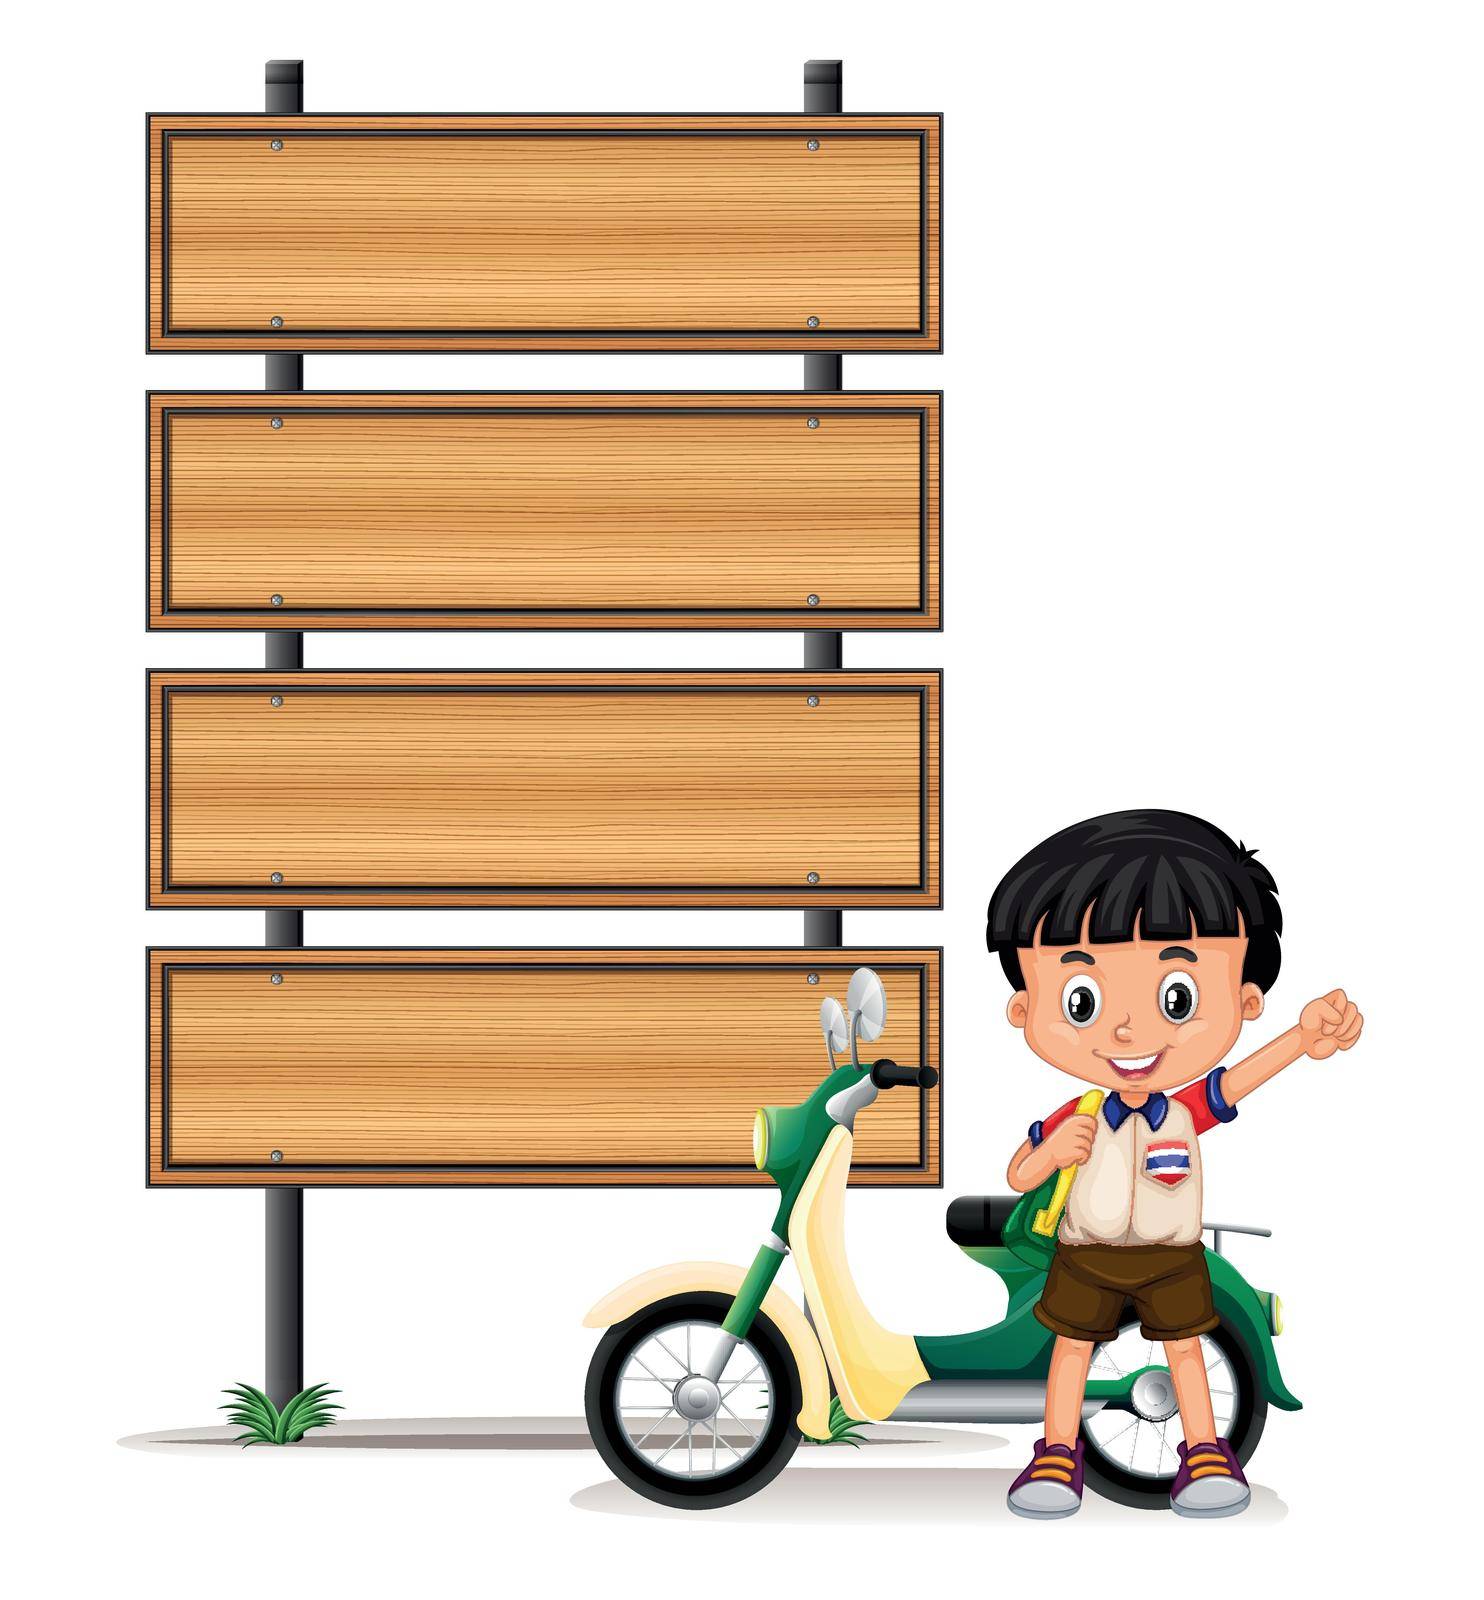 Thai boy and motorcycle by the roadsigns illustration